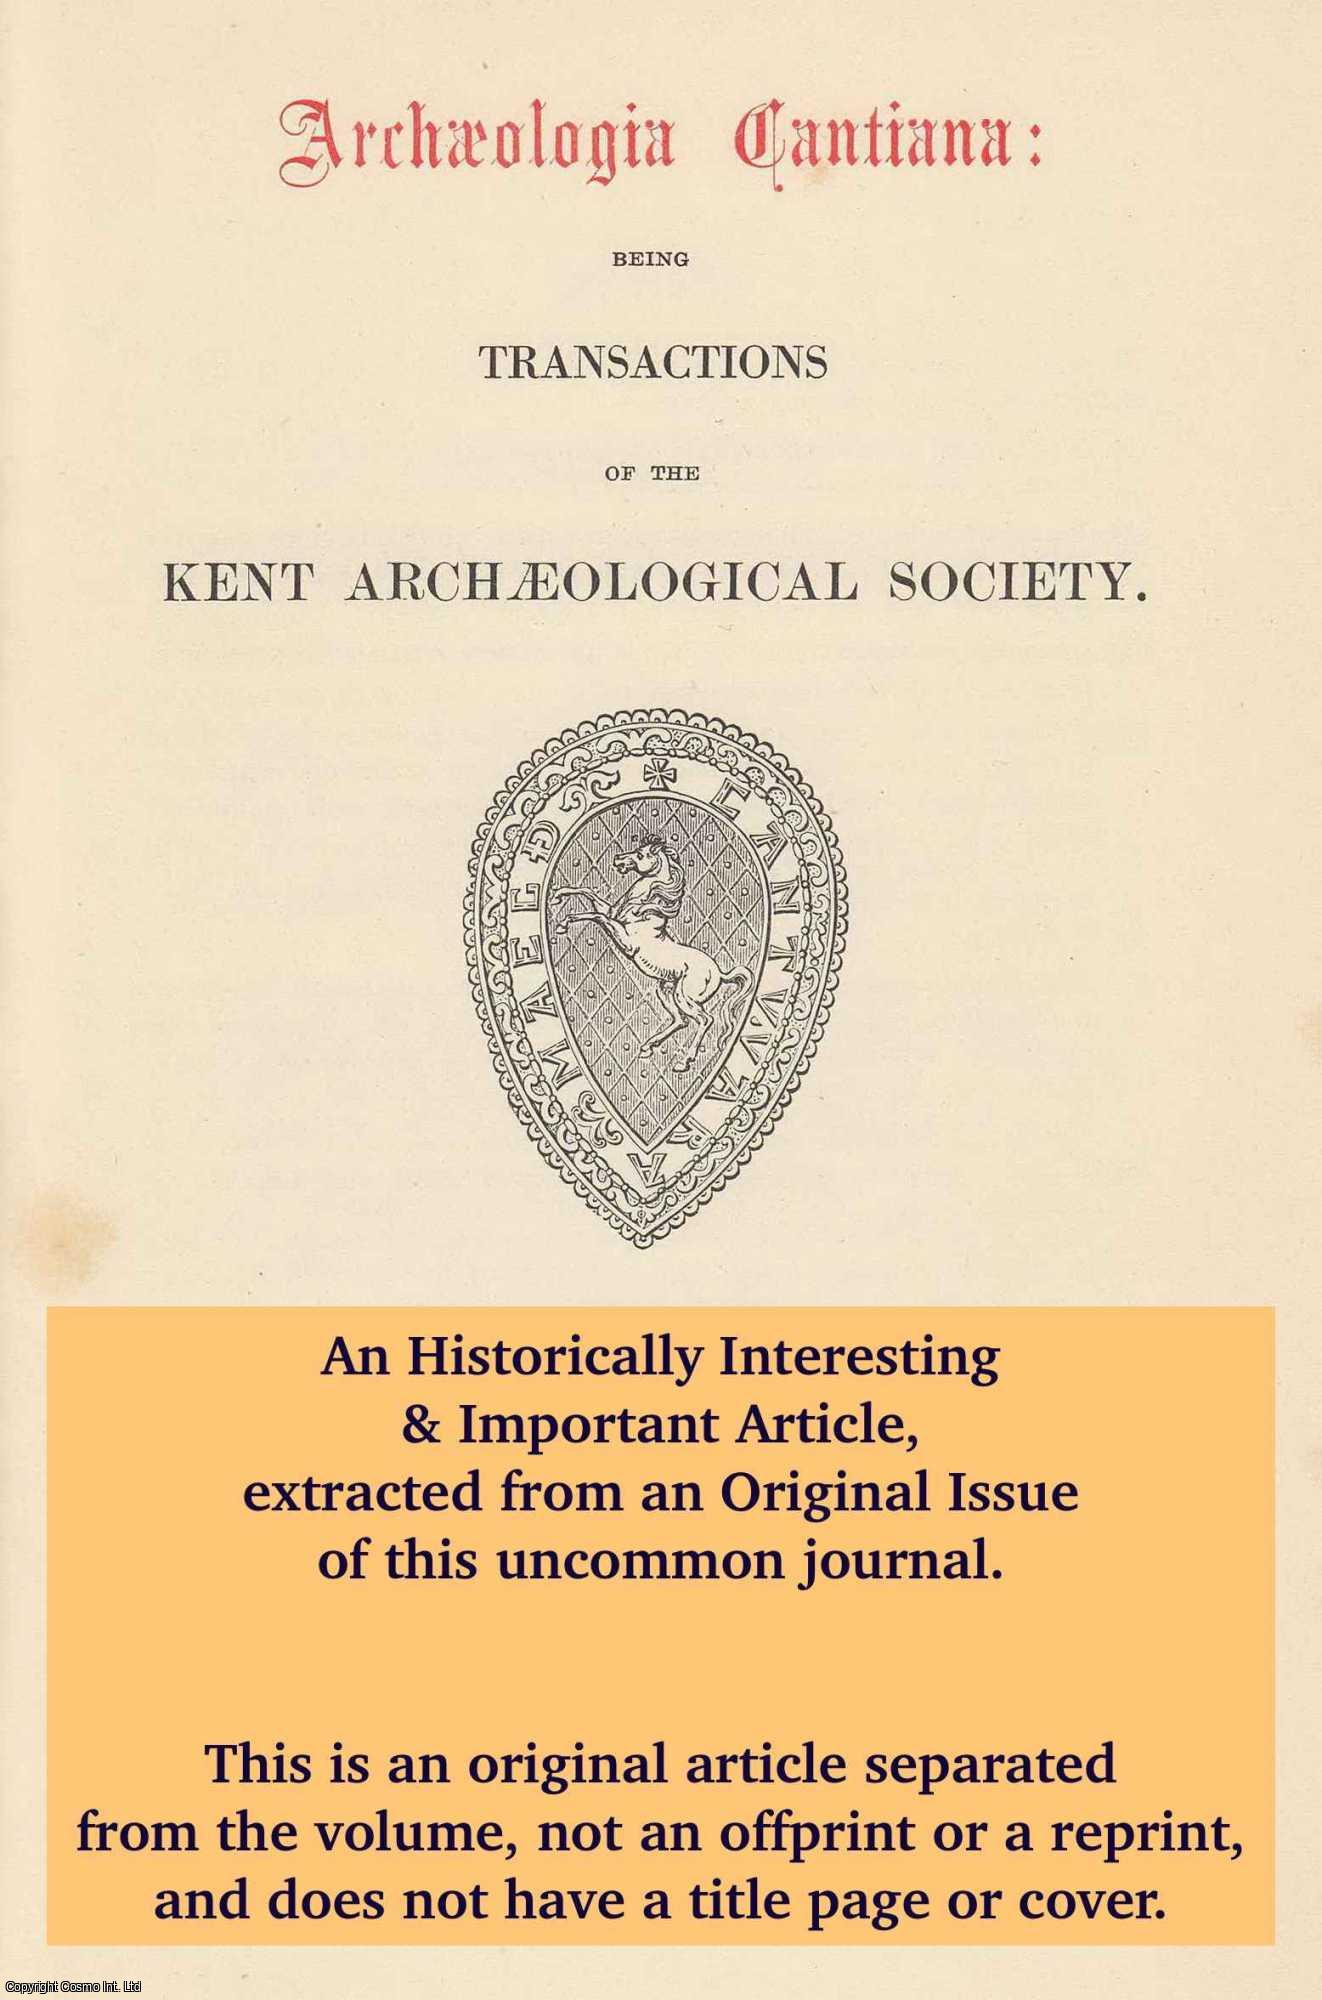 Aymer Vallance - Two Chalke Wills. An original article from The Archaeologia Cantiana: Transactions of The Kent Archaeological Society, 1930.